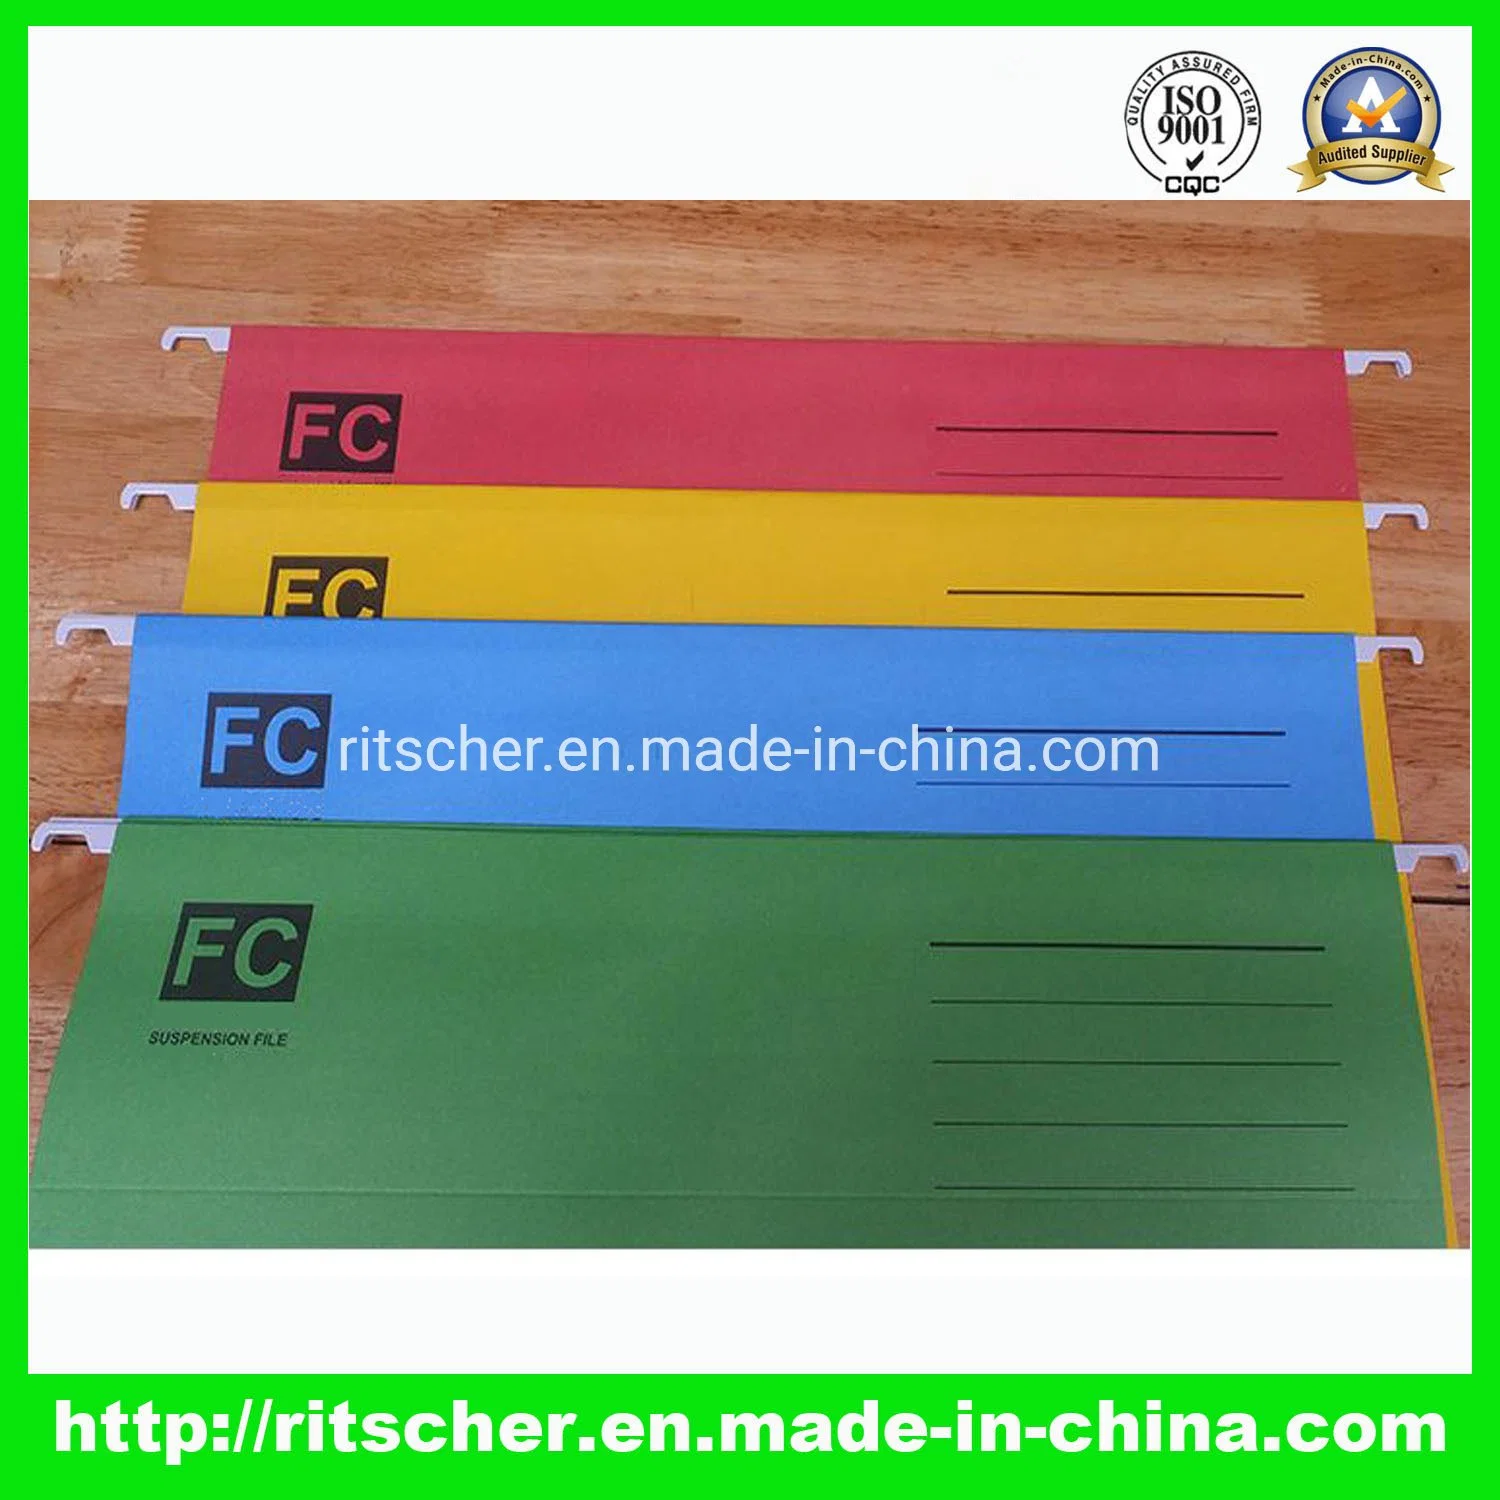 Stationery Set of Stationery Factory Stationery Paper Stationery Products